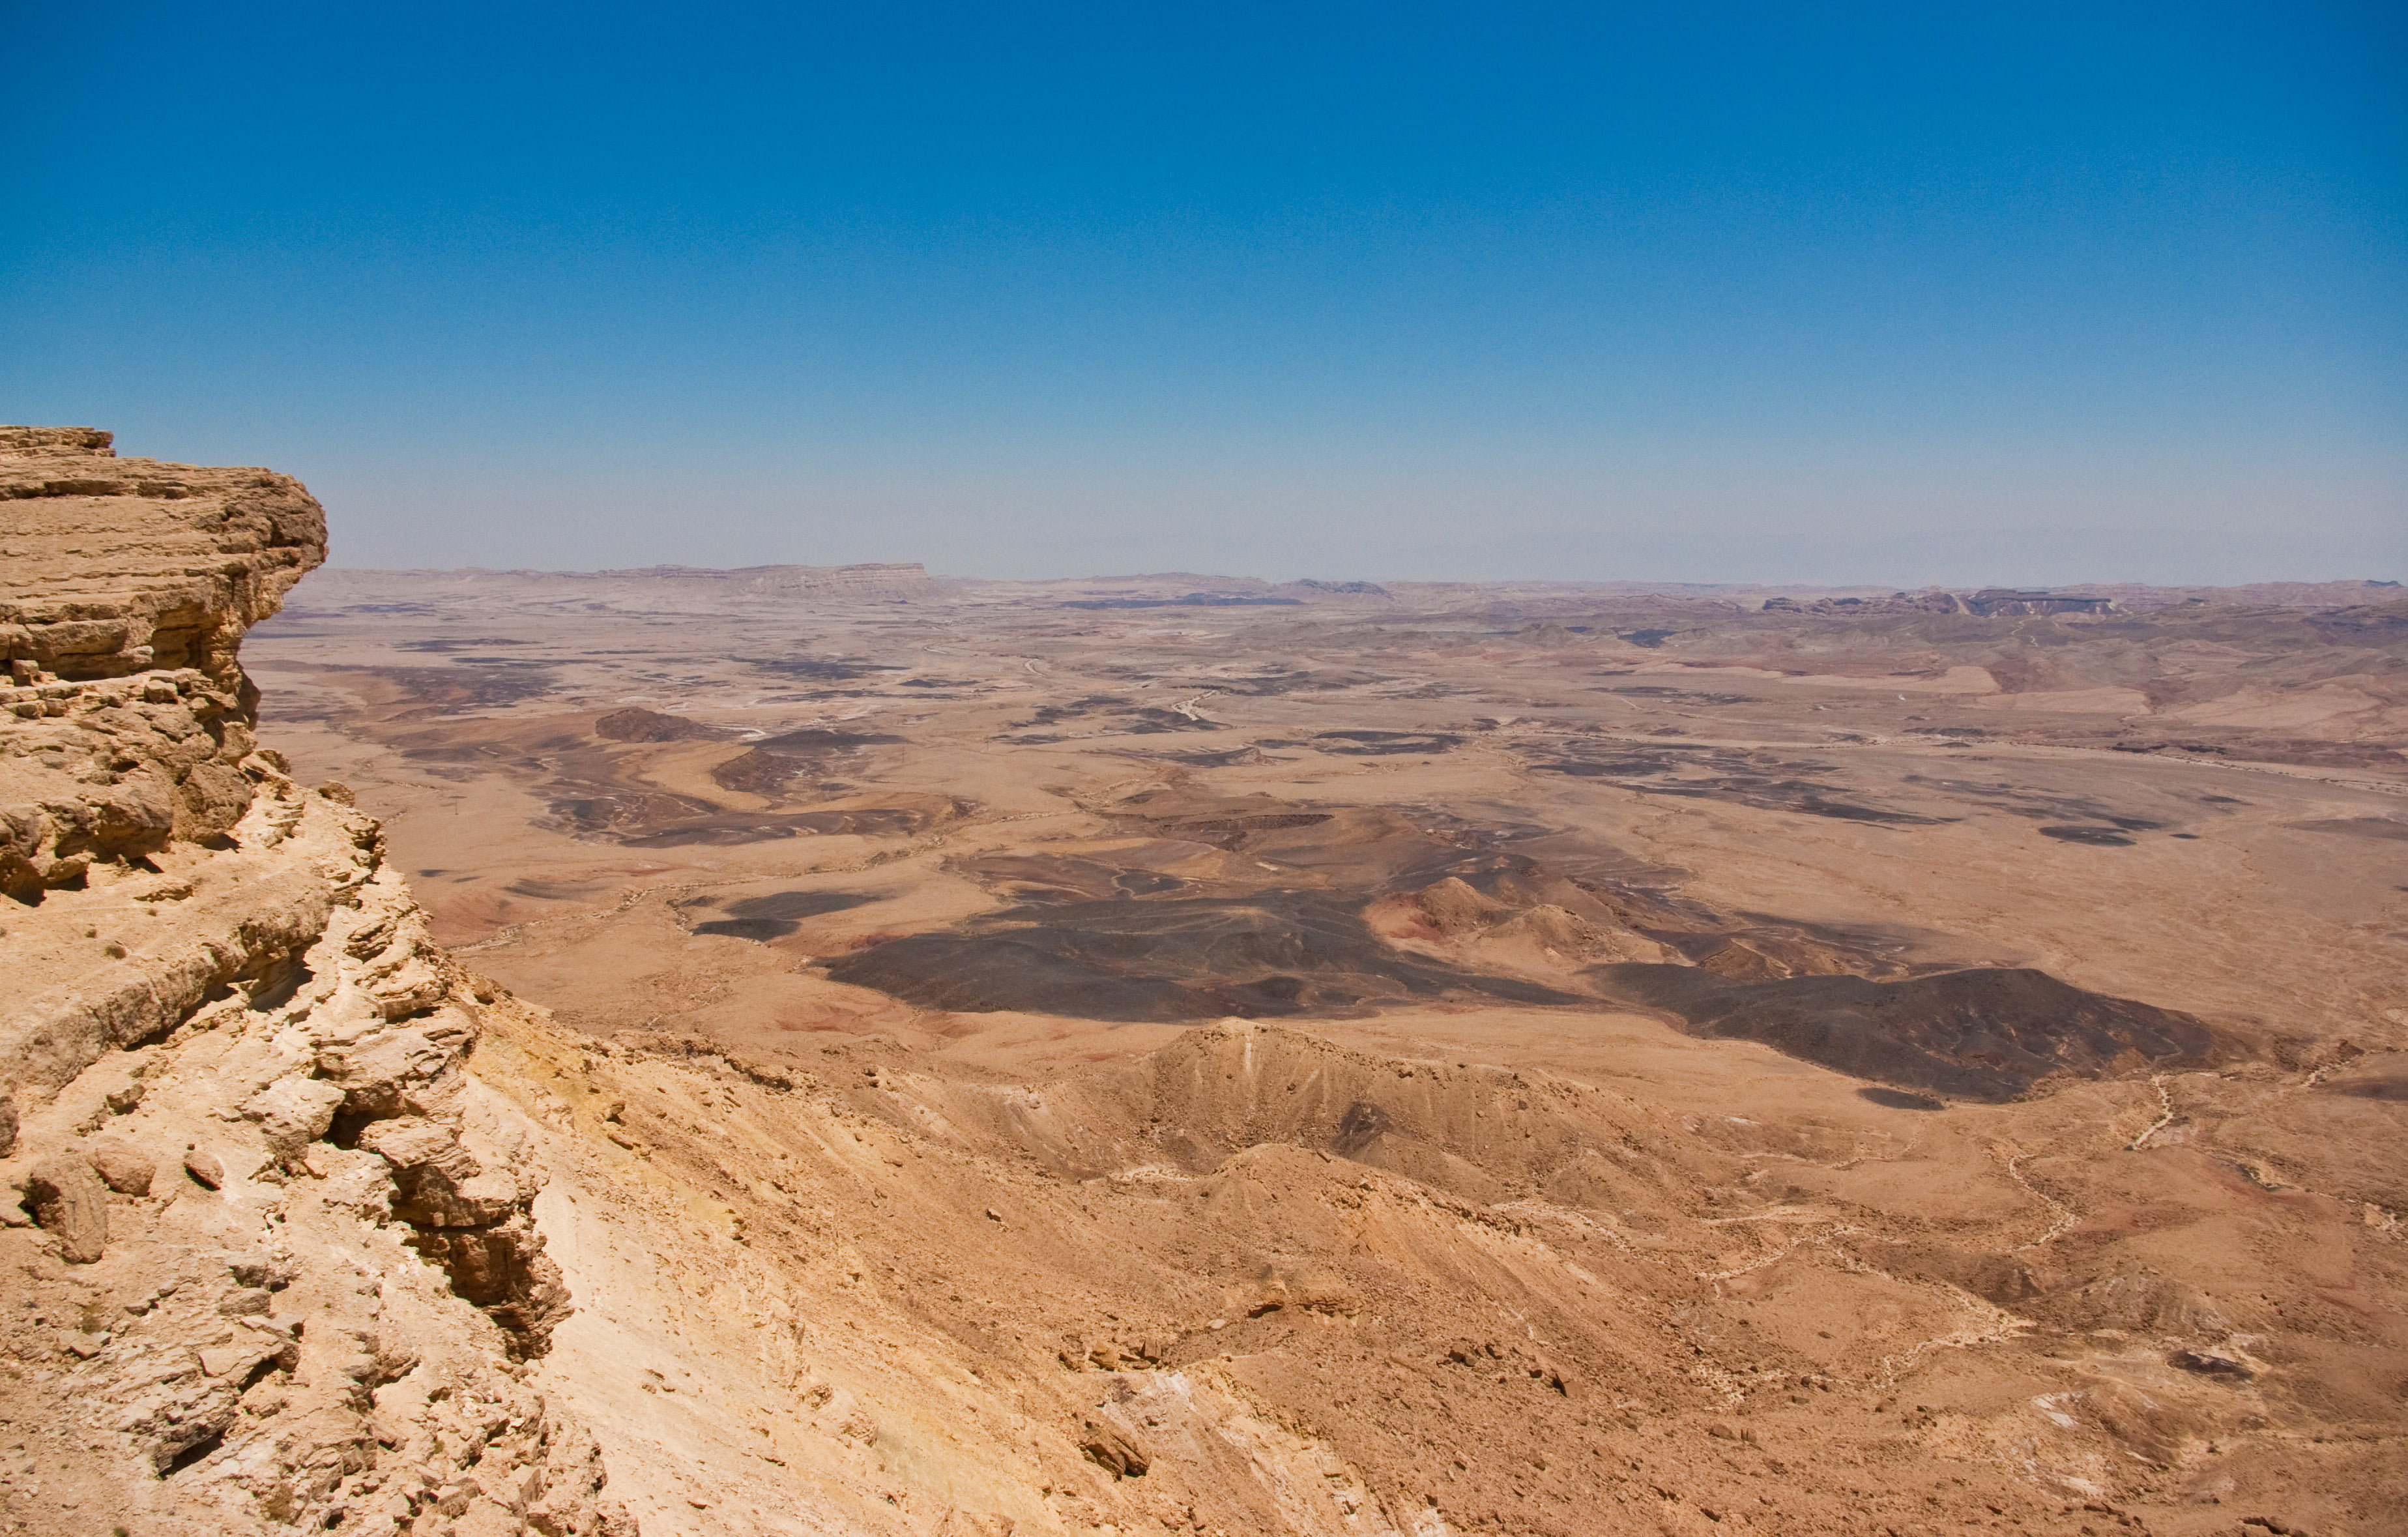 Mitzpe Ramon area was chosen as the region for this simulation center because of its similarities to Mars. Creative Commons